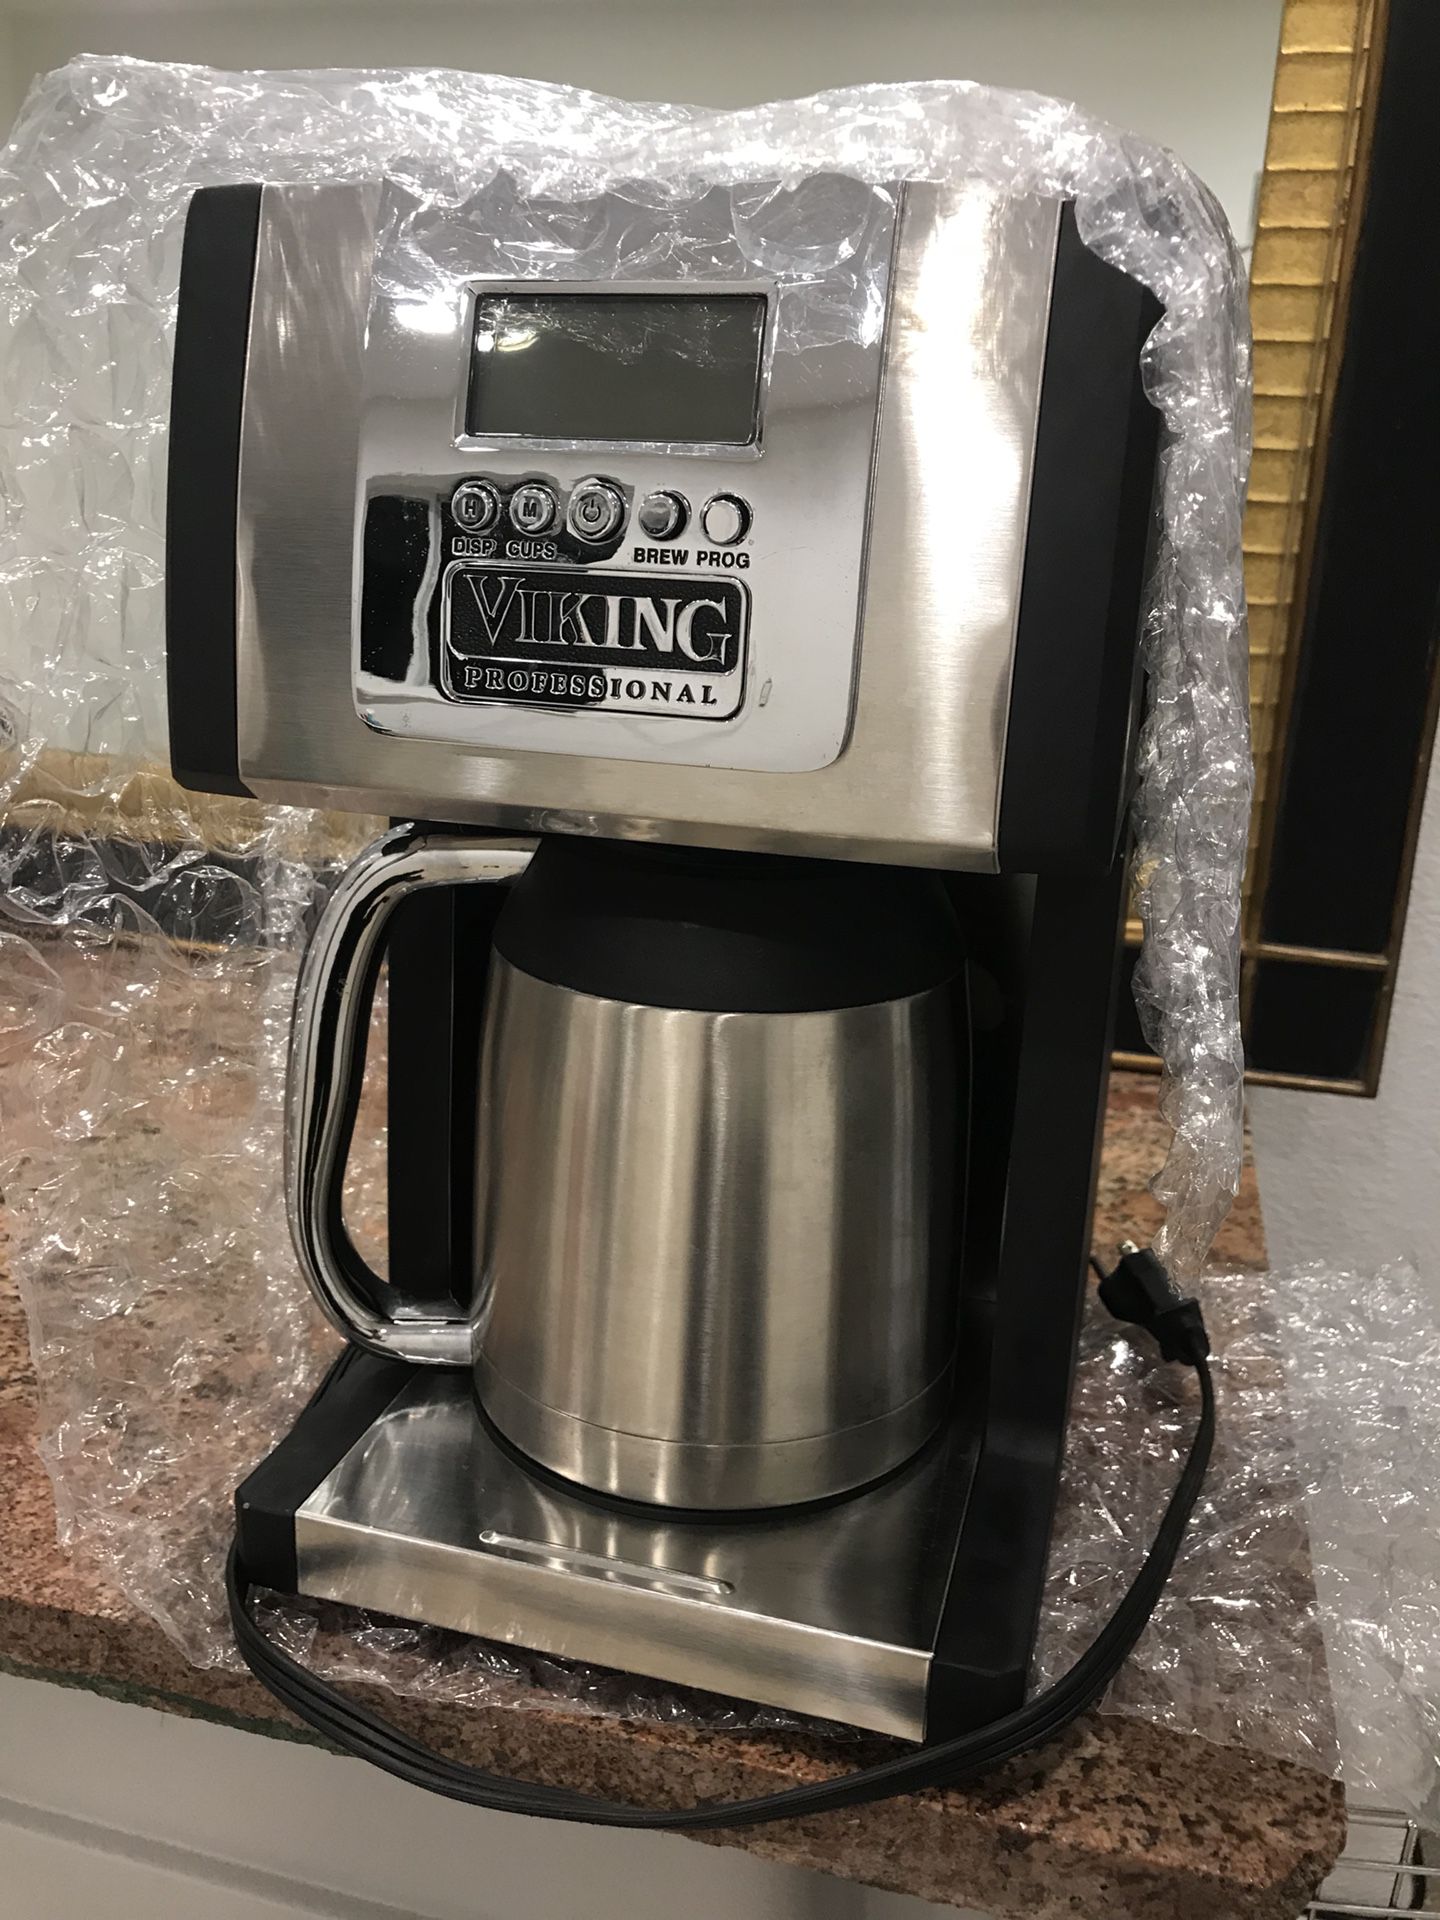 BRAUN 12 CUP COFFEE MAKER TYPE 4073 for Sale in Canal Fulton, OH - OfferUp